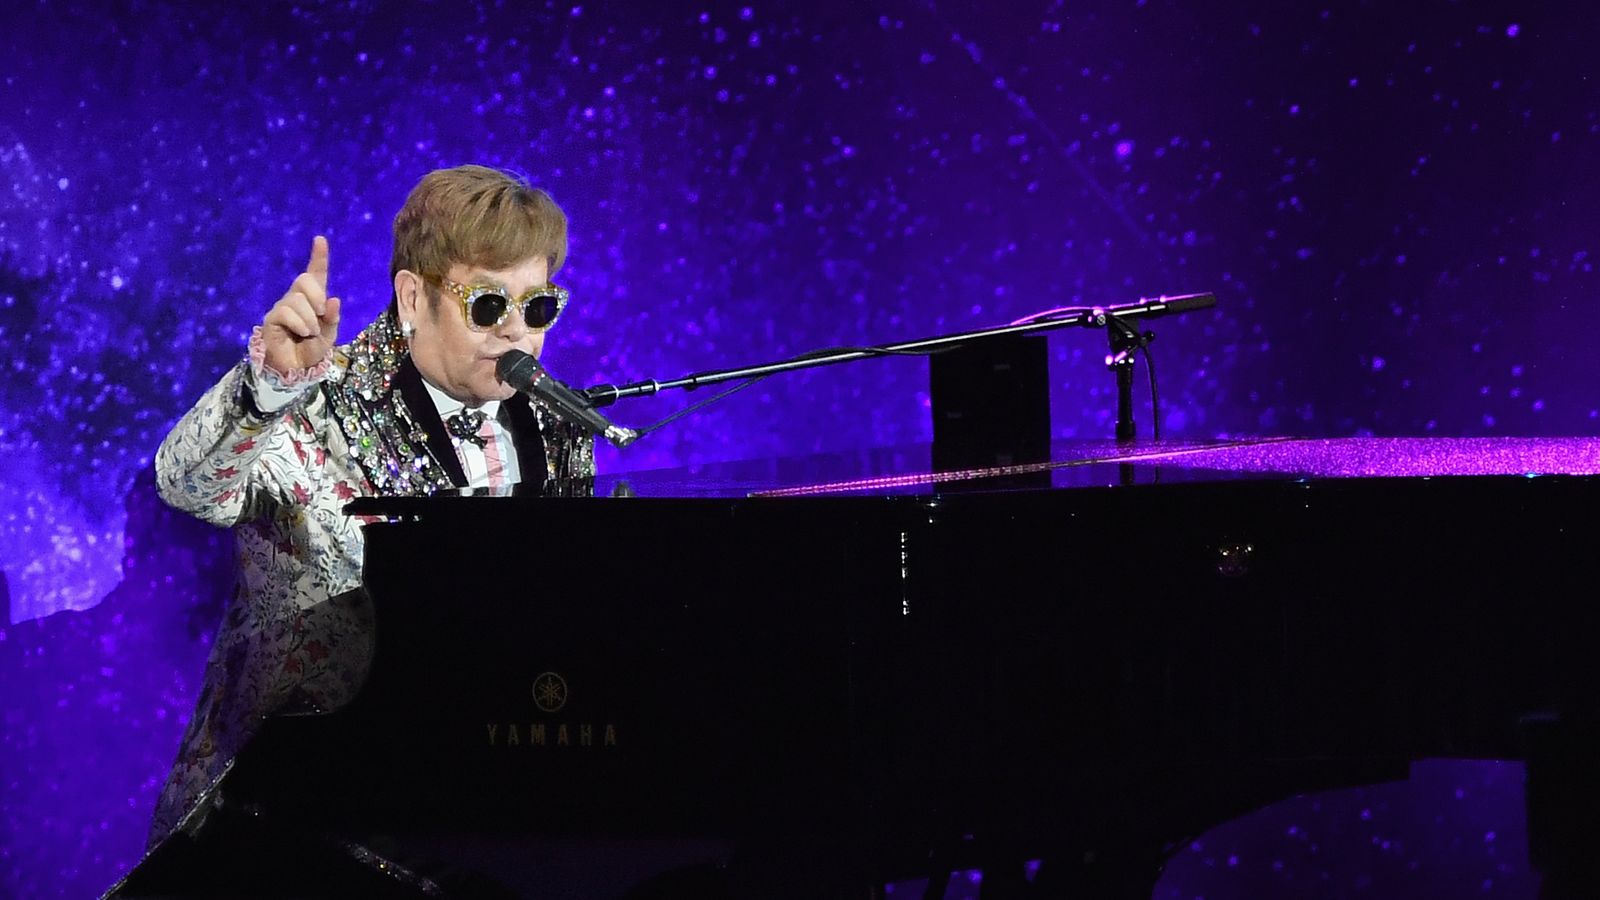 Singer Sir Elton John announces final tour: 'I want to go out with a bang' | Ents ...1600 x 900